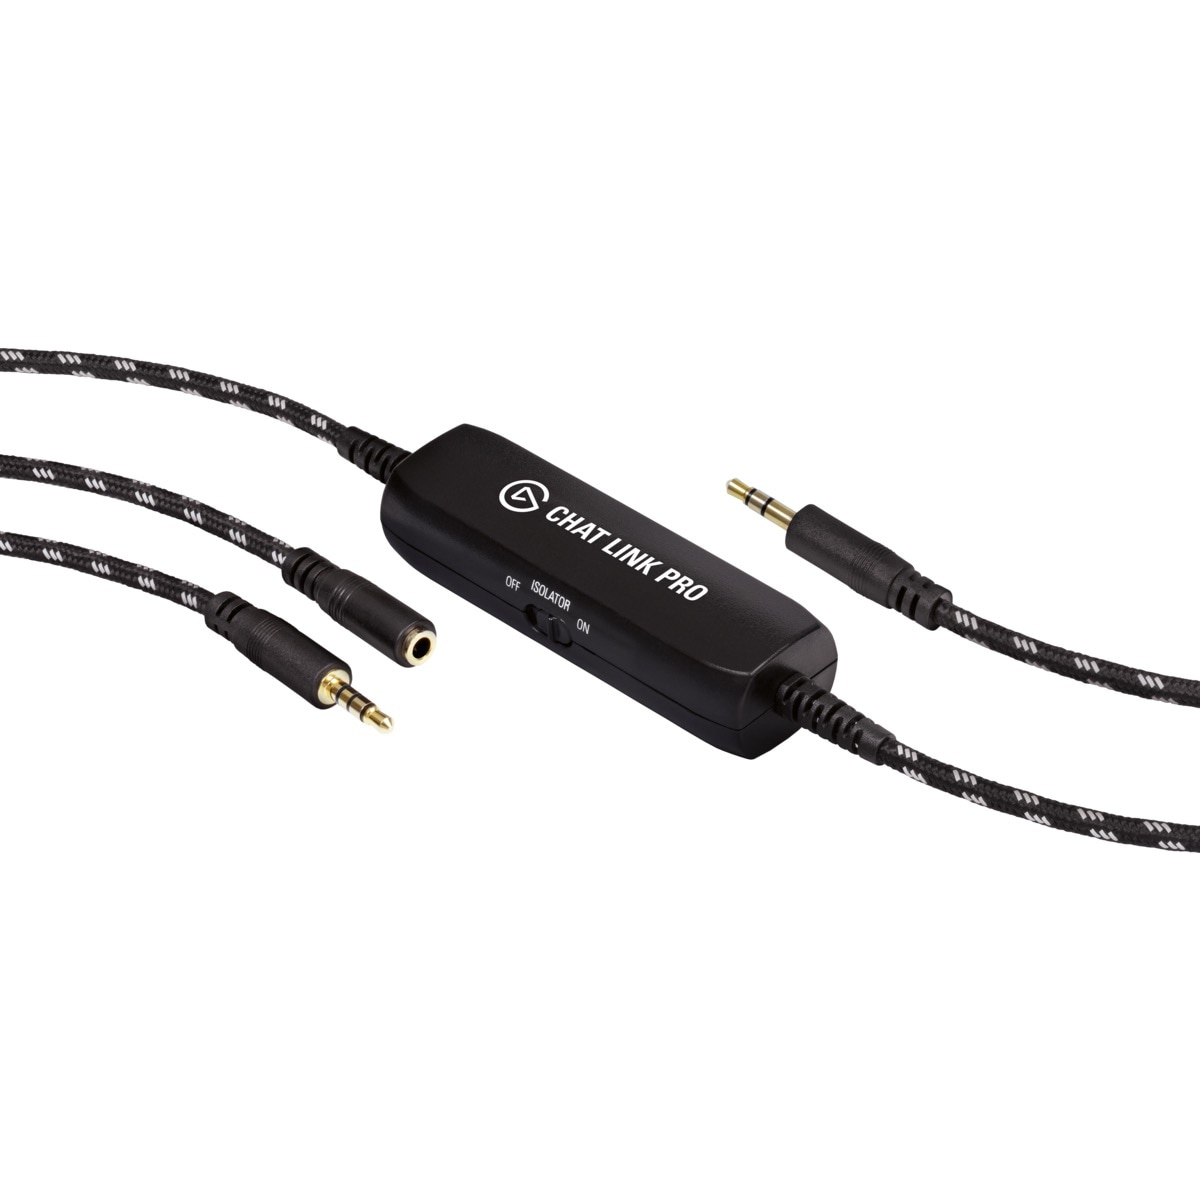 Elgato Audio-Adapter »Chat Link Pro«, 250 cm, Audio-Adapter für PS5, PS4, Nintendo Switch, Gameplay-Sound